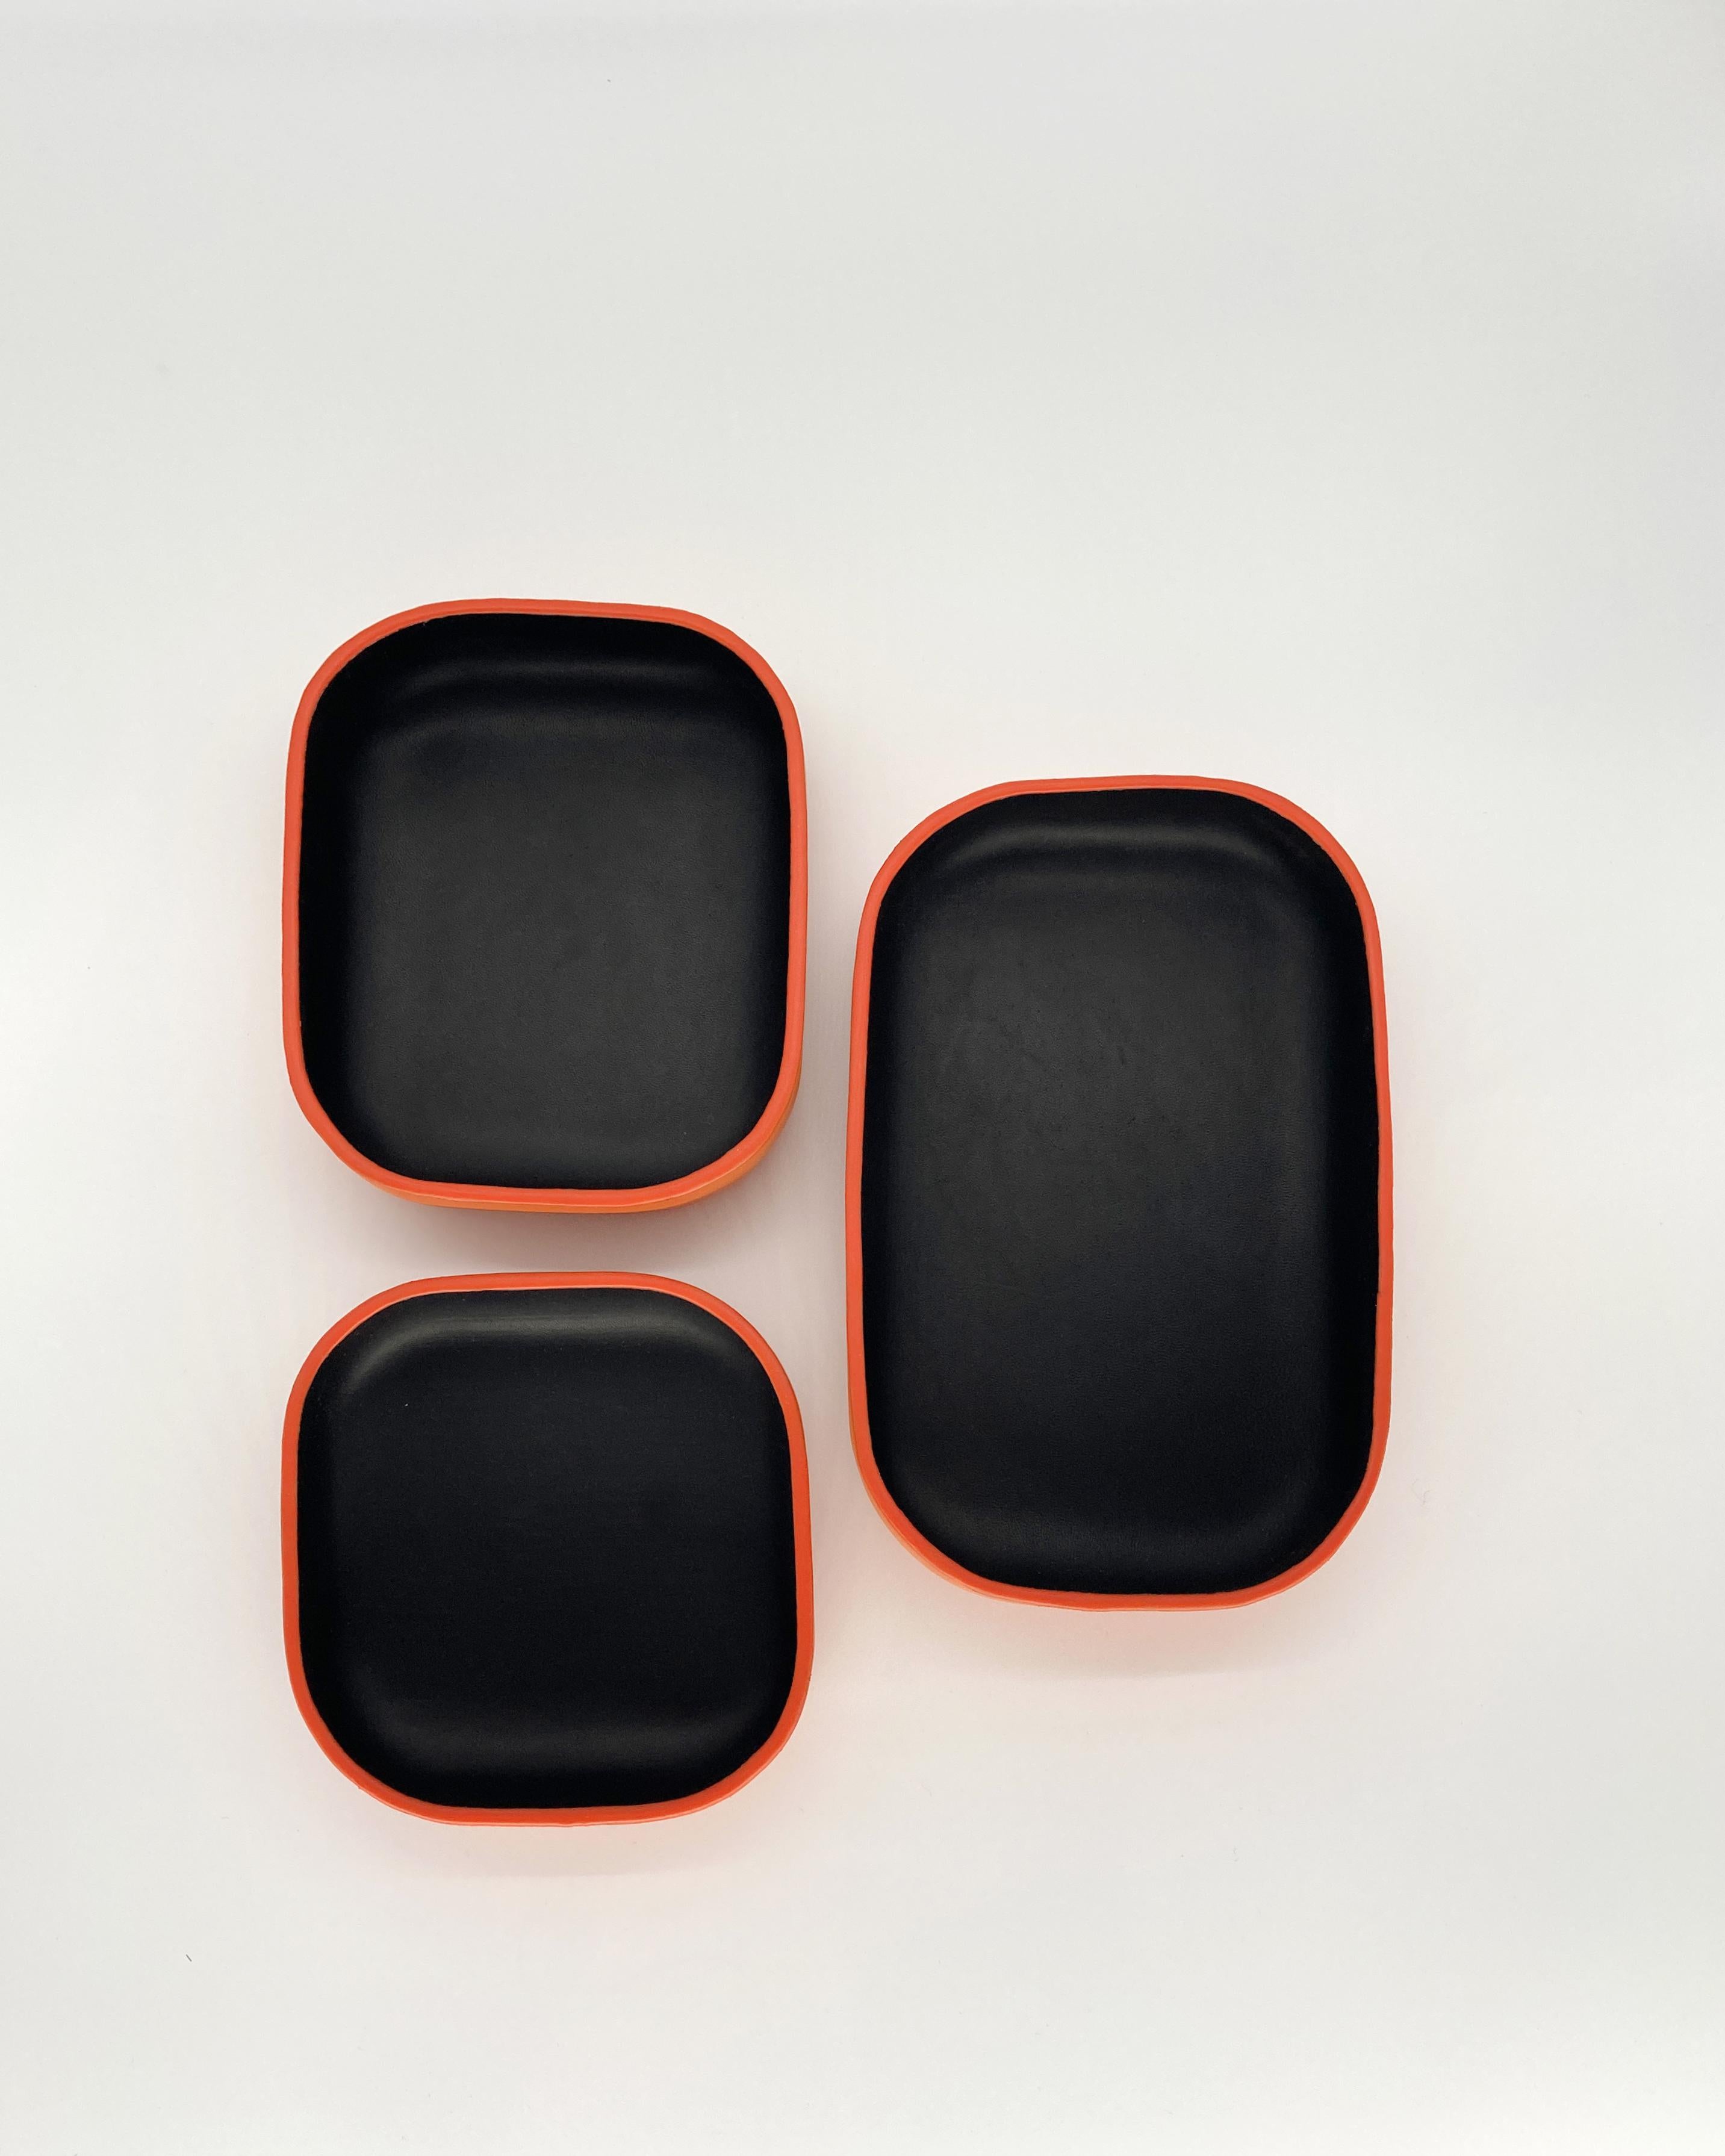 This set of handmade leather trays in black and orange are the perfect addition to complete your dining room table or as a centerpiece in your living room. Rustic charm meets contemporary handcrafted design sensibility in this exquisite tray ser.